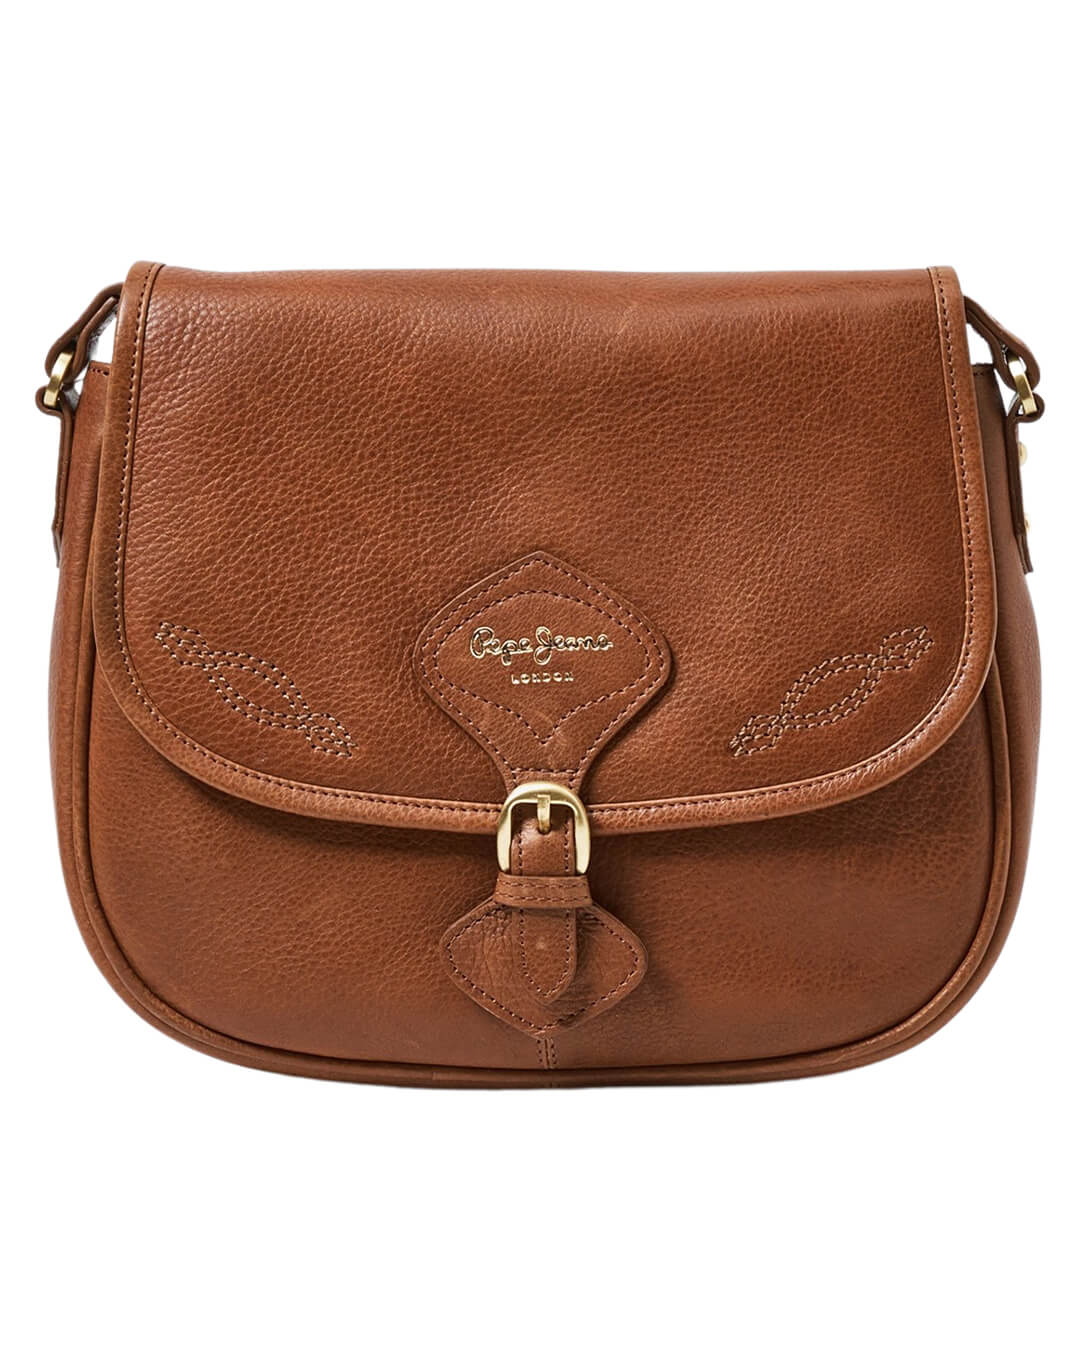 Pepe Jeans Bags ONE Pepe Jeans Andrea Brown Bag